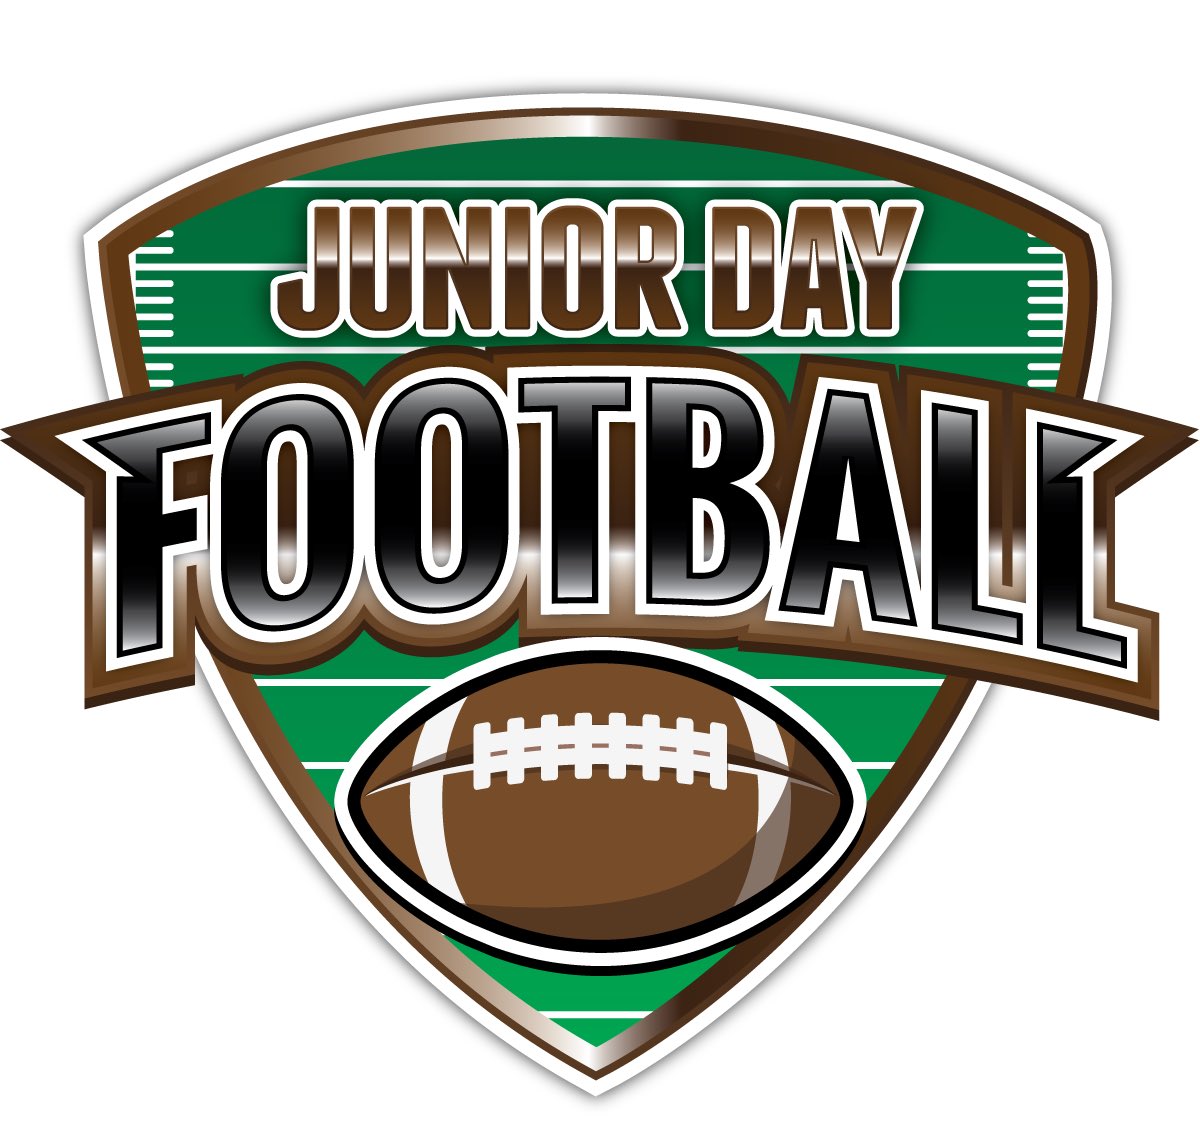 Im excited to be attending the Junior Day Football Camp on April 21st at @FriendsU! Excited to meet new coaches and build new relationships! Thank you @FalconsFU for hosting this camp! @coachjshall @coach_kellett @DHatfield70 @Coach__Kline @CoachFeuerborn @RecruitPiedmont